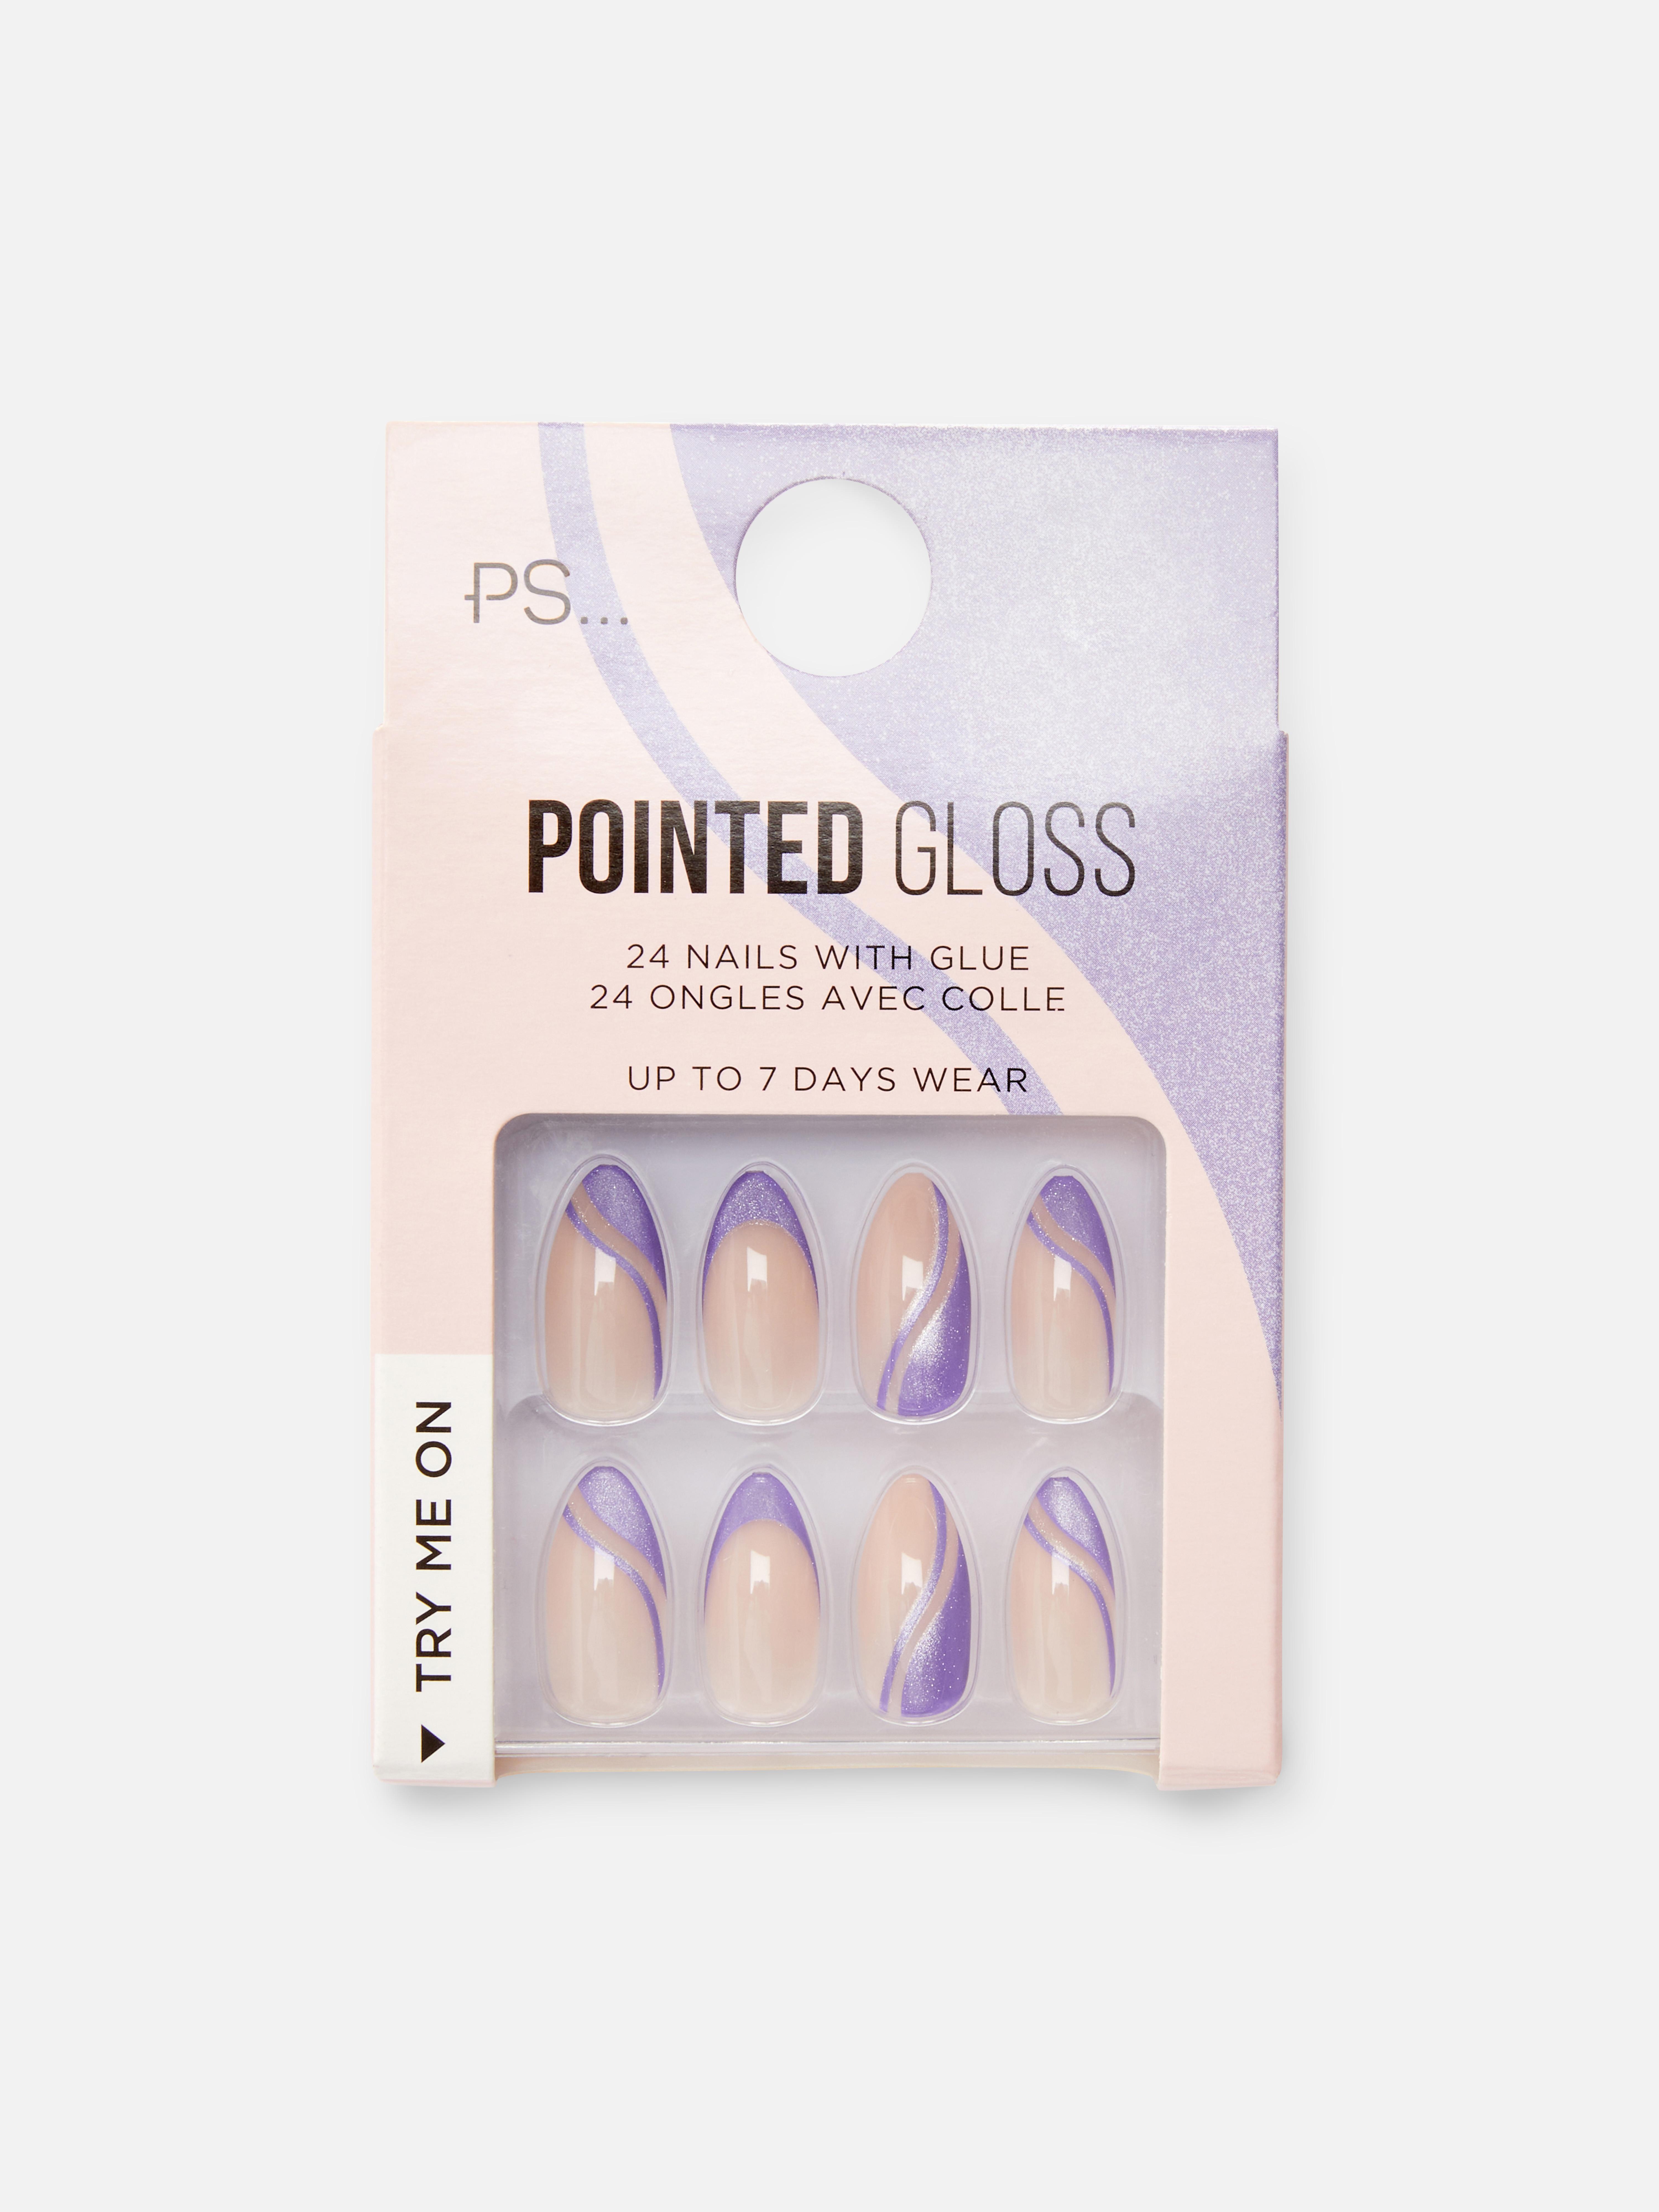 PS Pointed Gloss Faux Nails